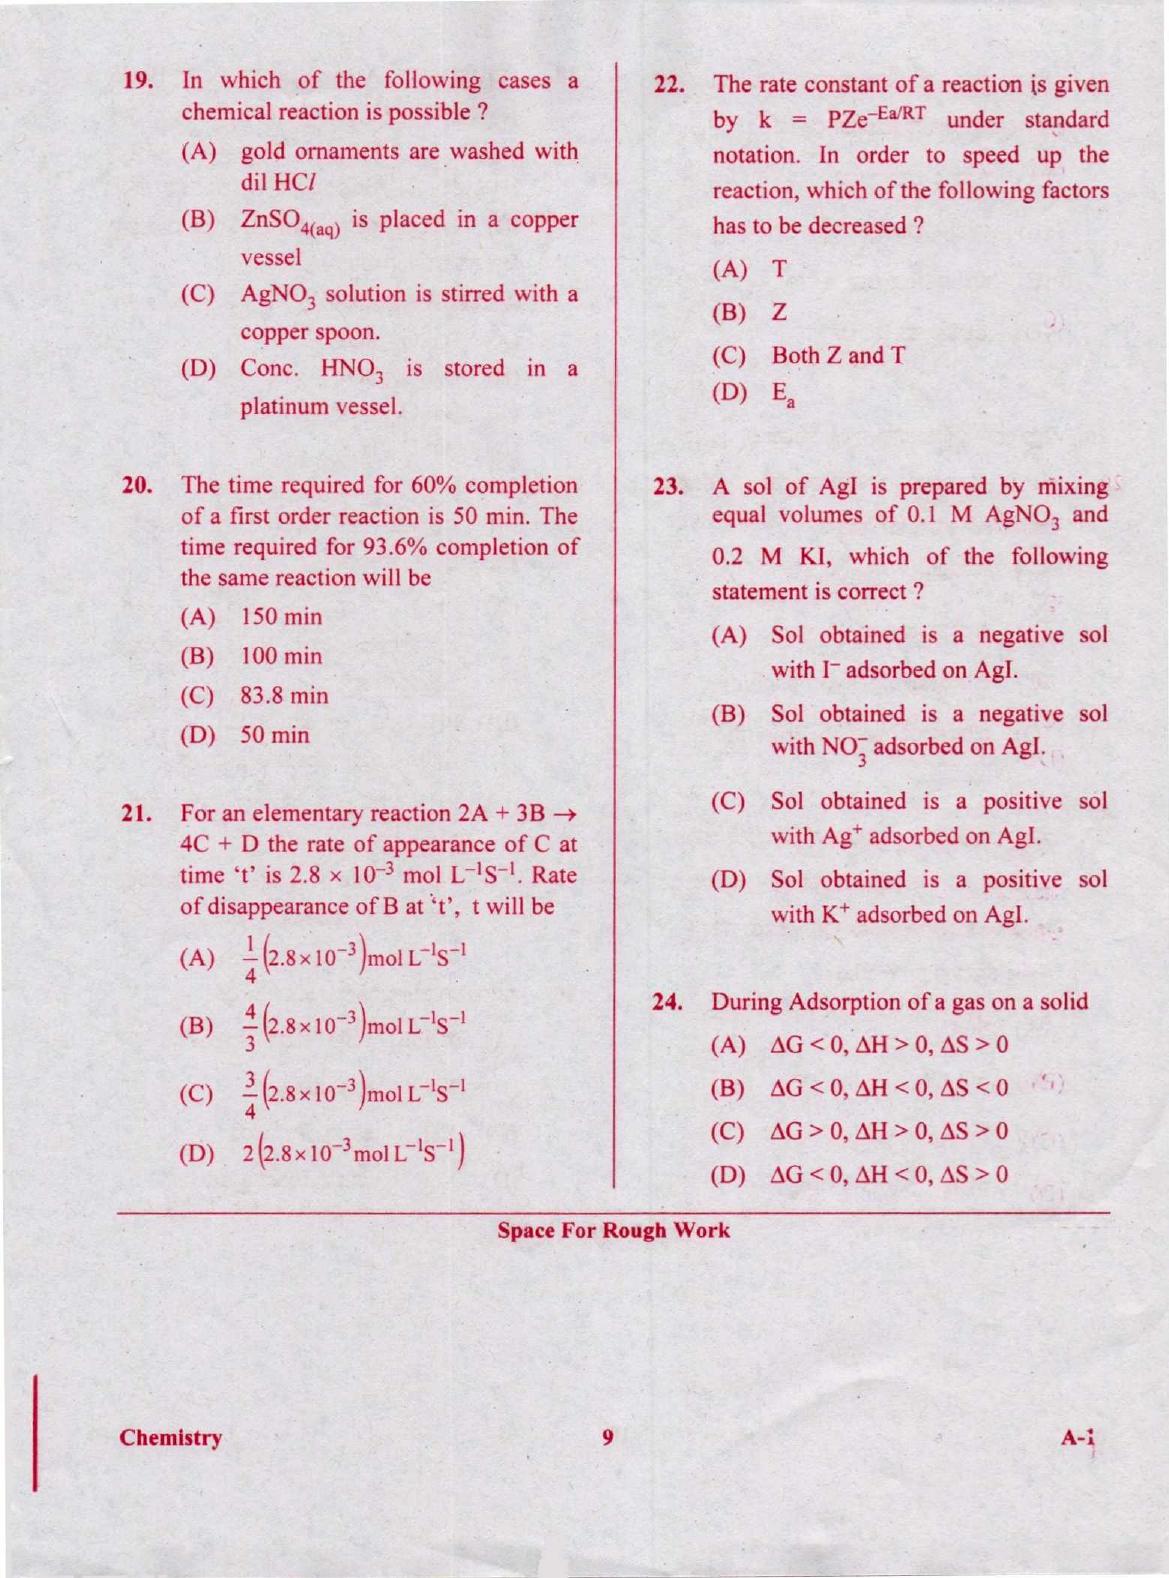 KCET Chemistry 2020 Question Papers - Page 9